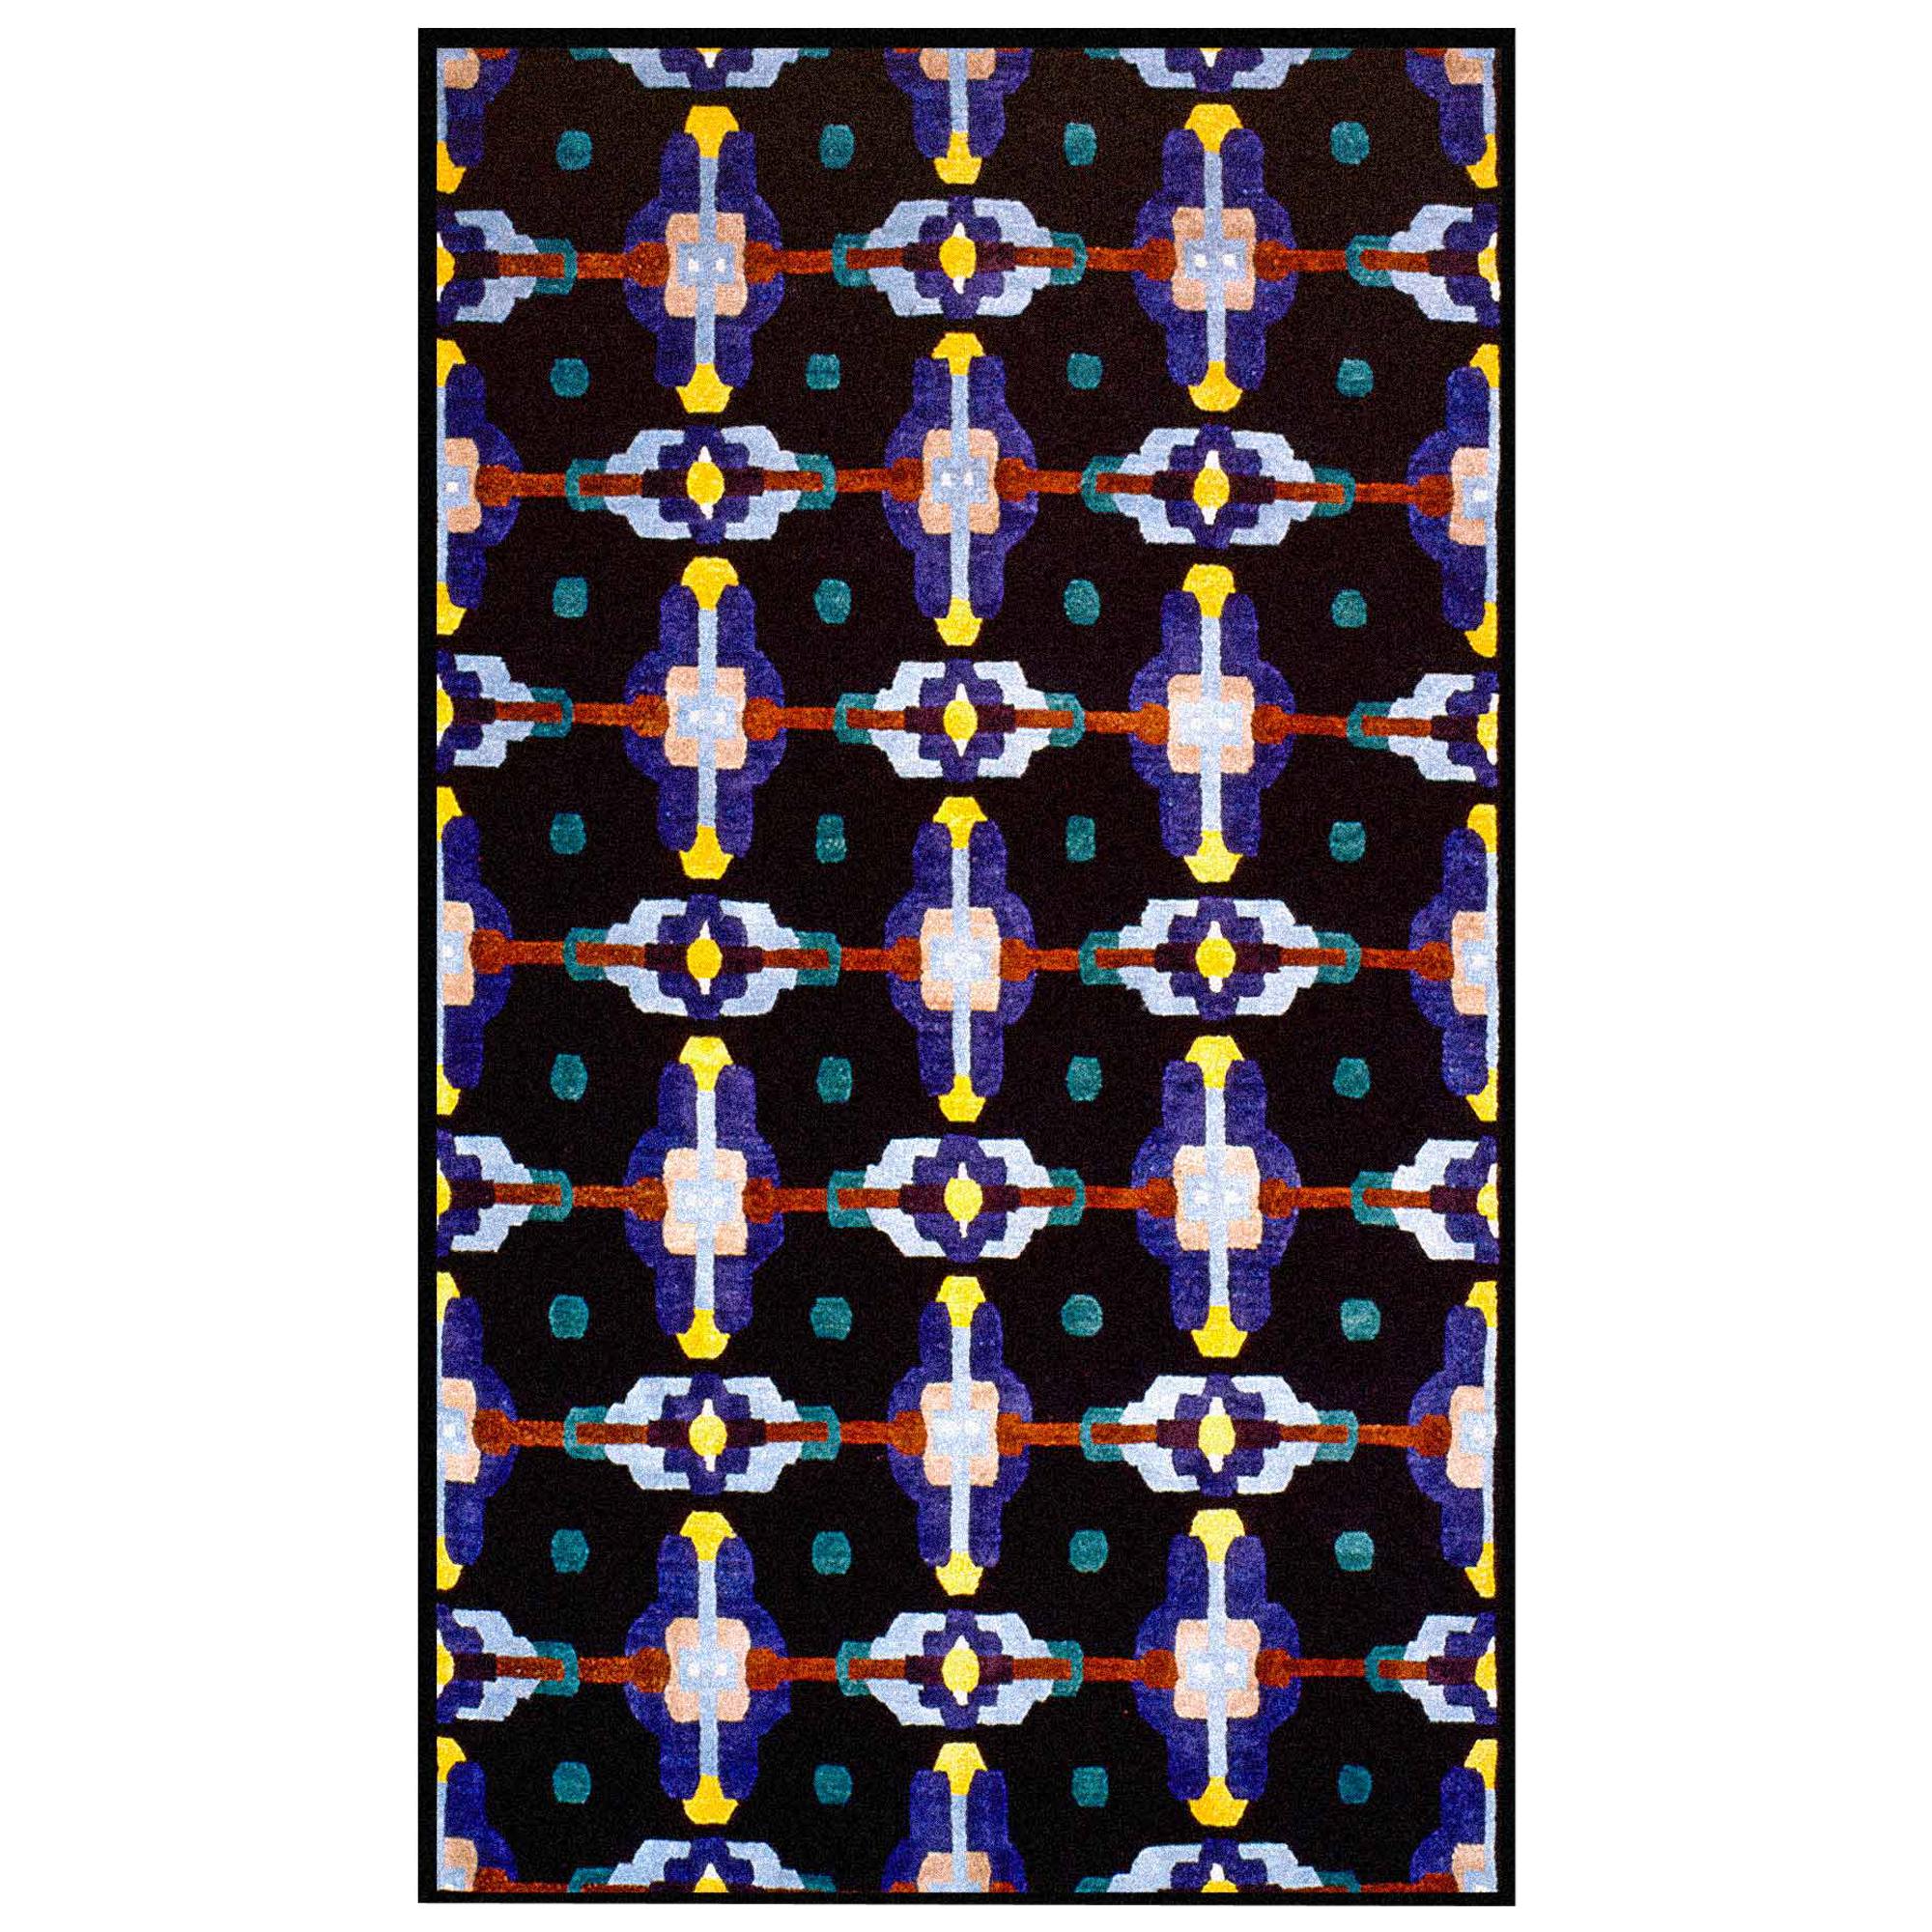 GJS4 Woollen Carpet by George J. Sowden for Post Design Collection/Memphis